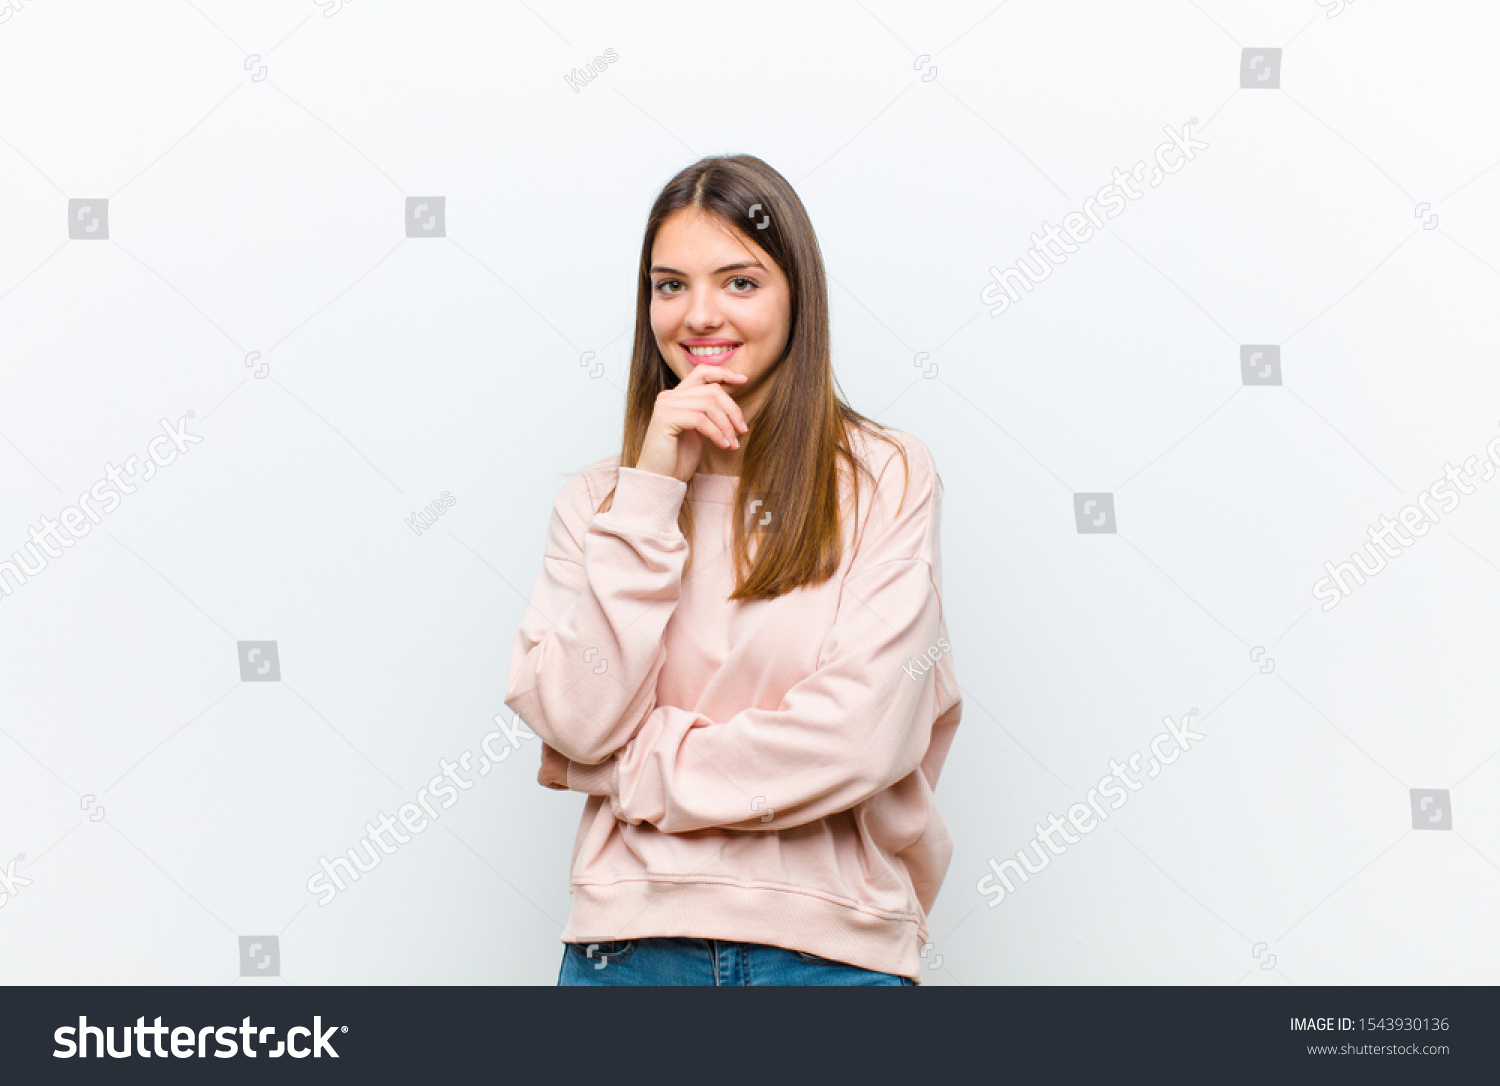 young pretty woman looking happy and smiling with hand on chin, wondering or asking a question, comparing options against white background #1543930136